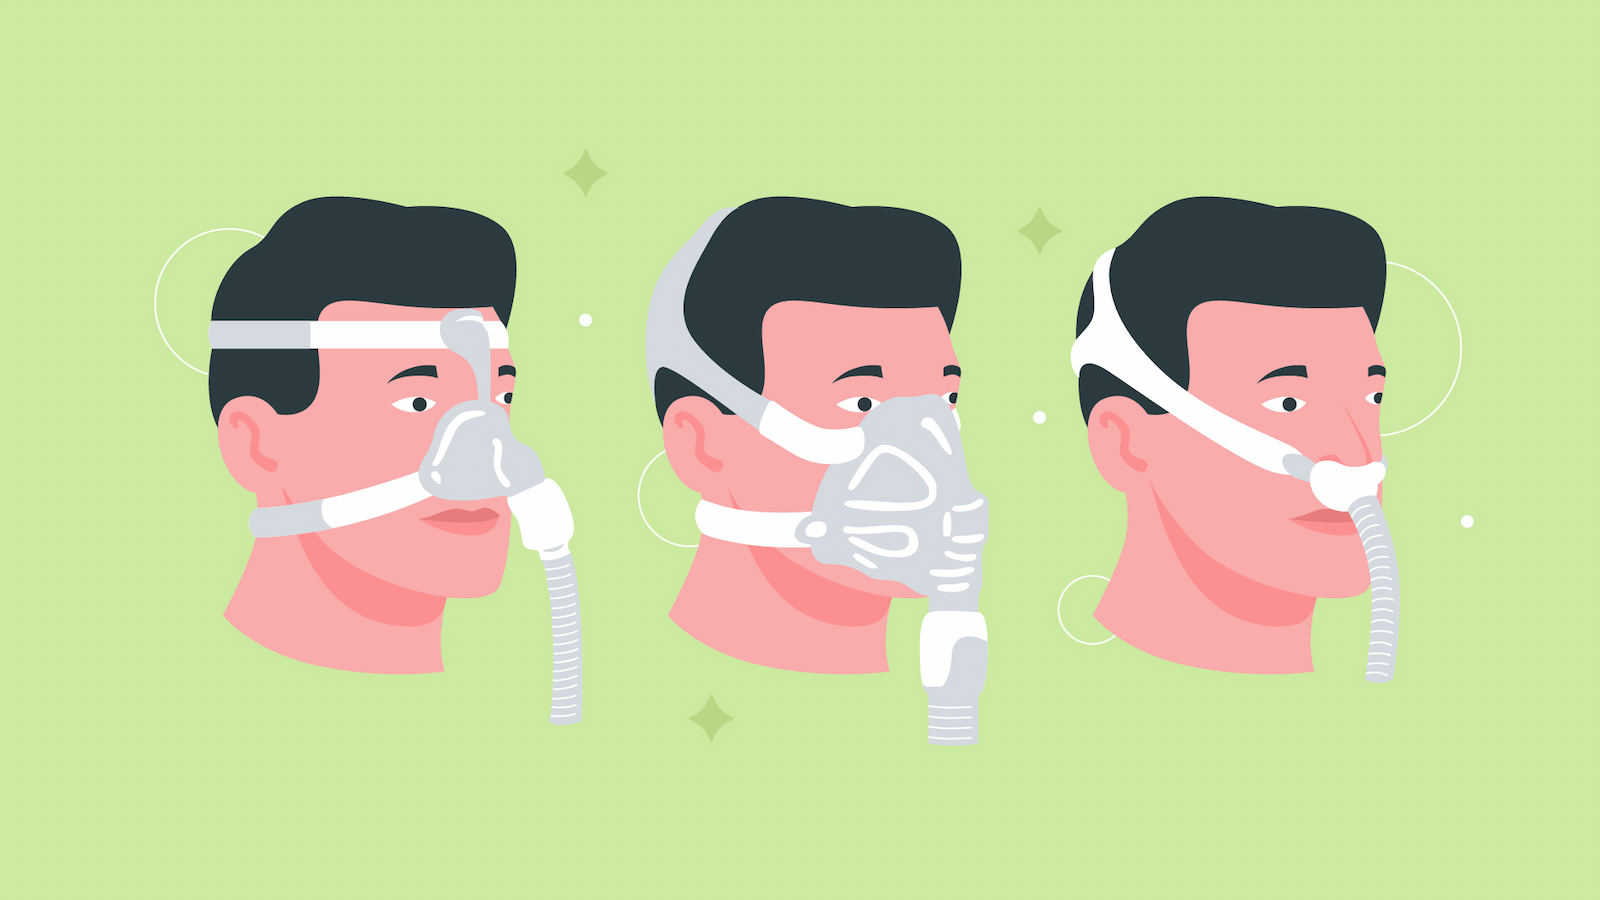 Four different types of nebulizer masks compared.